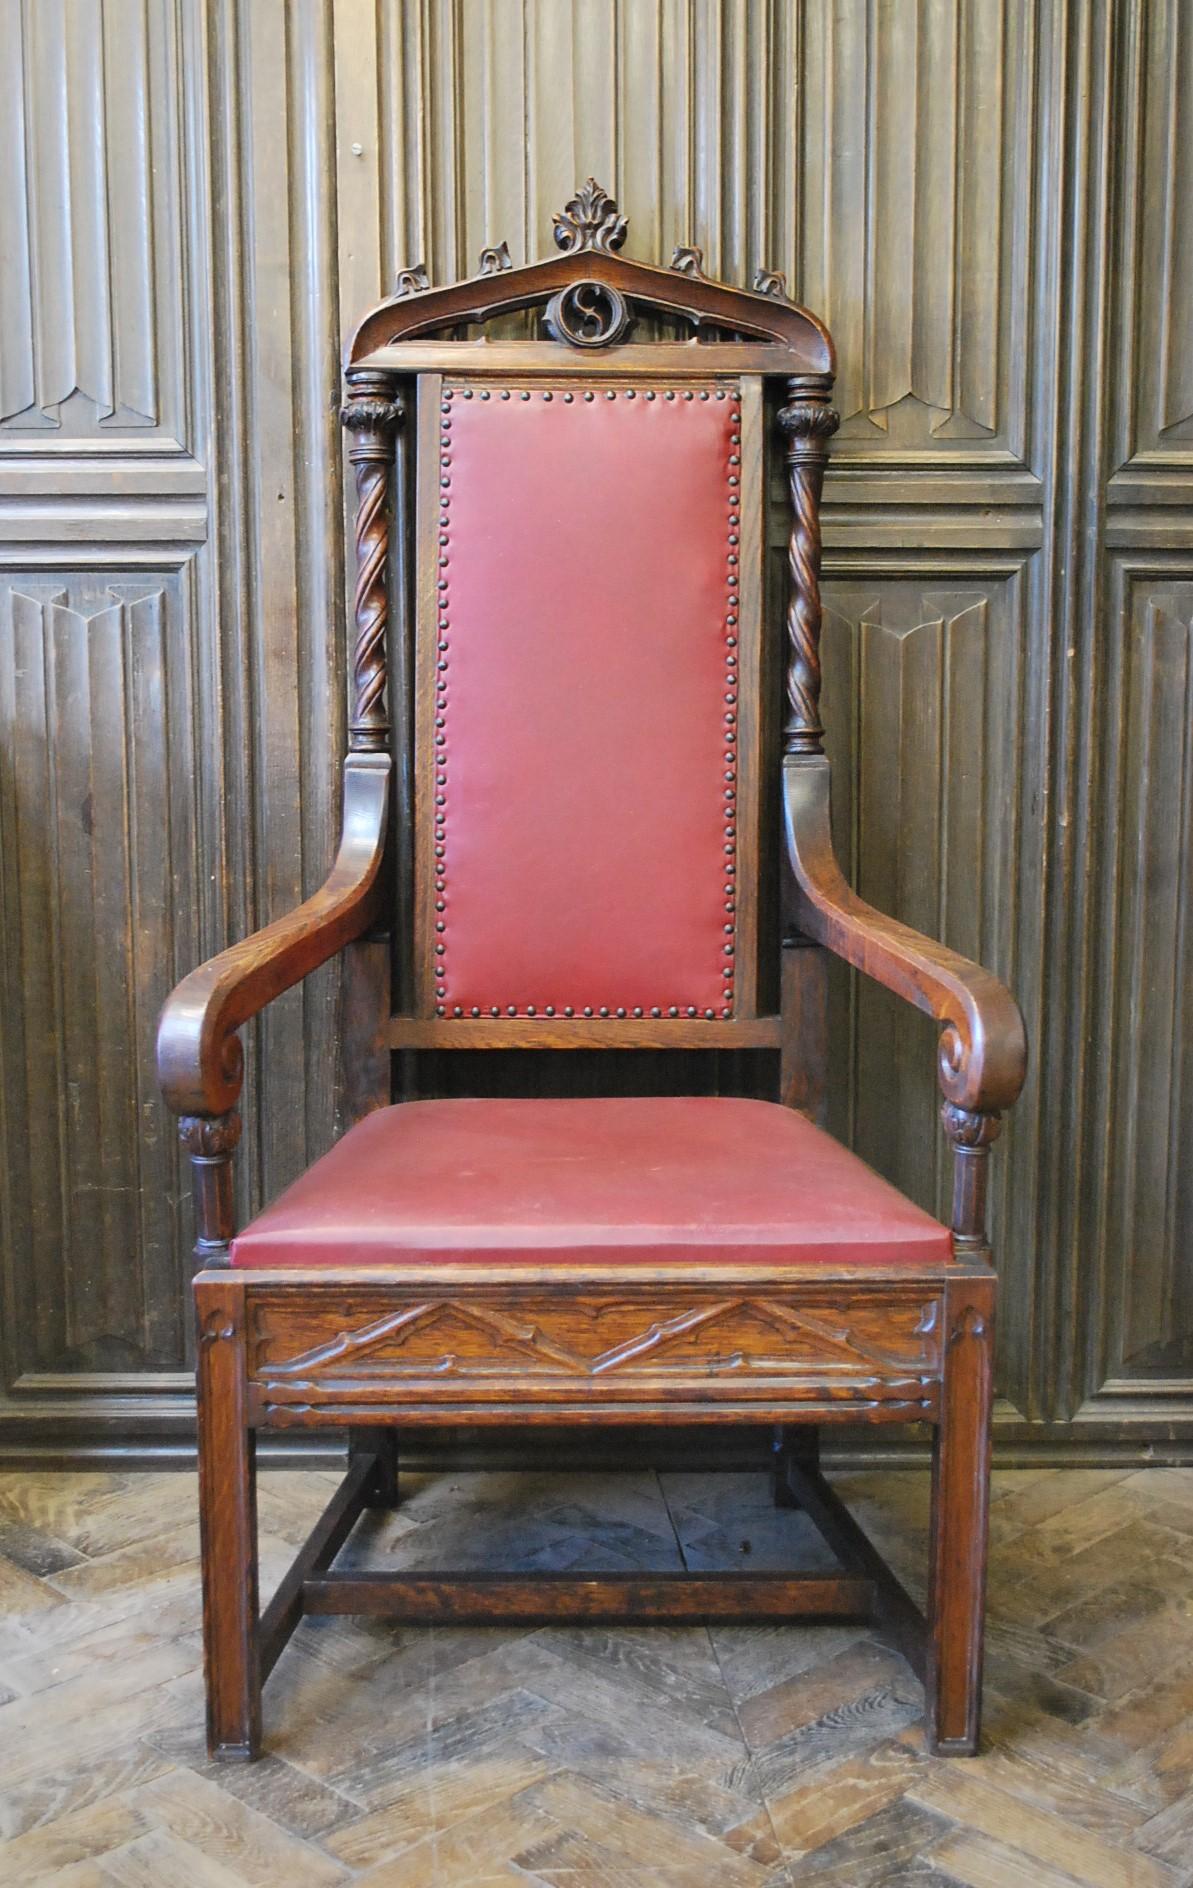 Hutton-Clarke Antiques is delighted to present an exquisite pair of Gothic Oak Armchairs, dating back to approximately 1880. These chairs stand as a testament to superior craftsmanship, boasting a host of intricate details and design